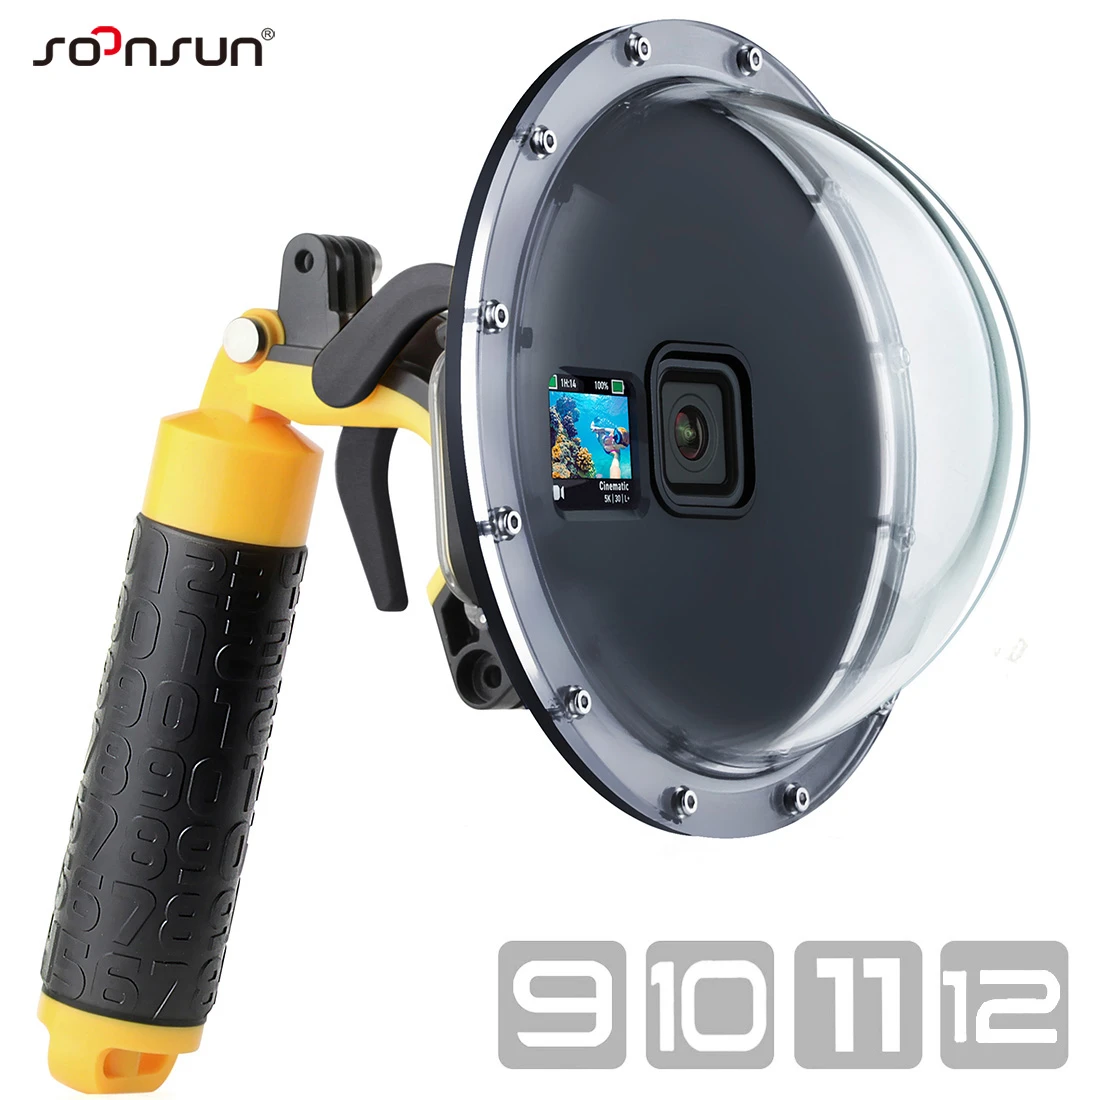 SOONSUN 45M Dome Port for GoPro Hero 9 10 Black Waterproof Diving Housing Case w/ Trigger Float Grip for Go Pro 9 10 Accessories